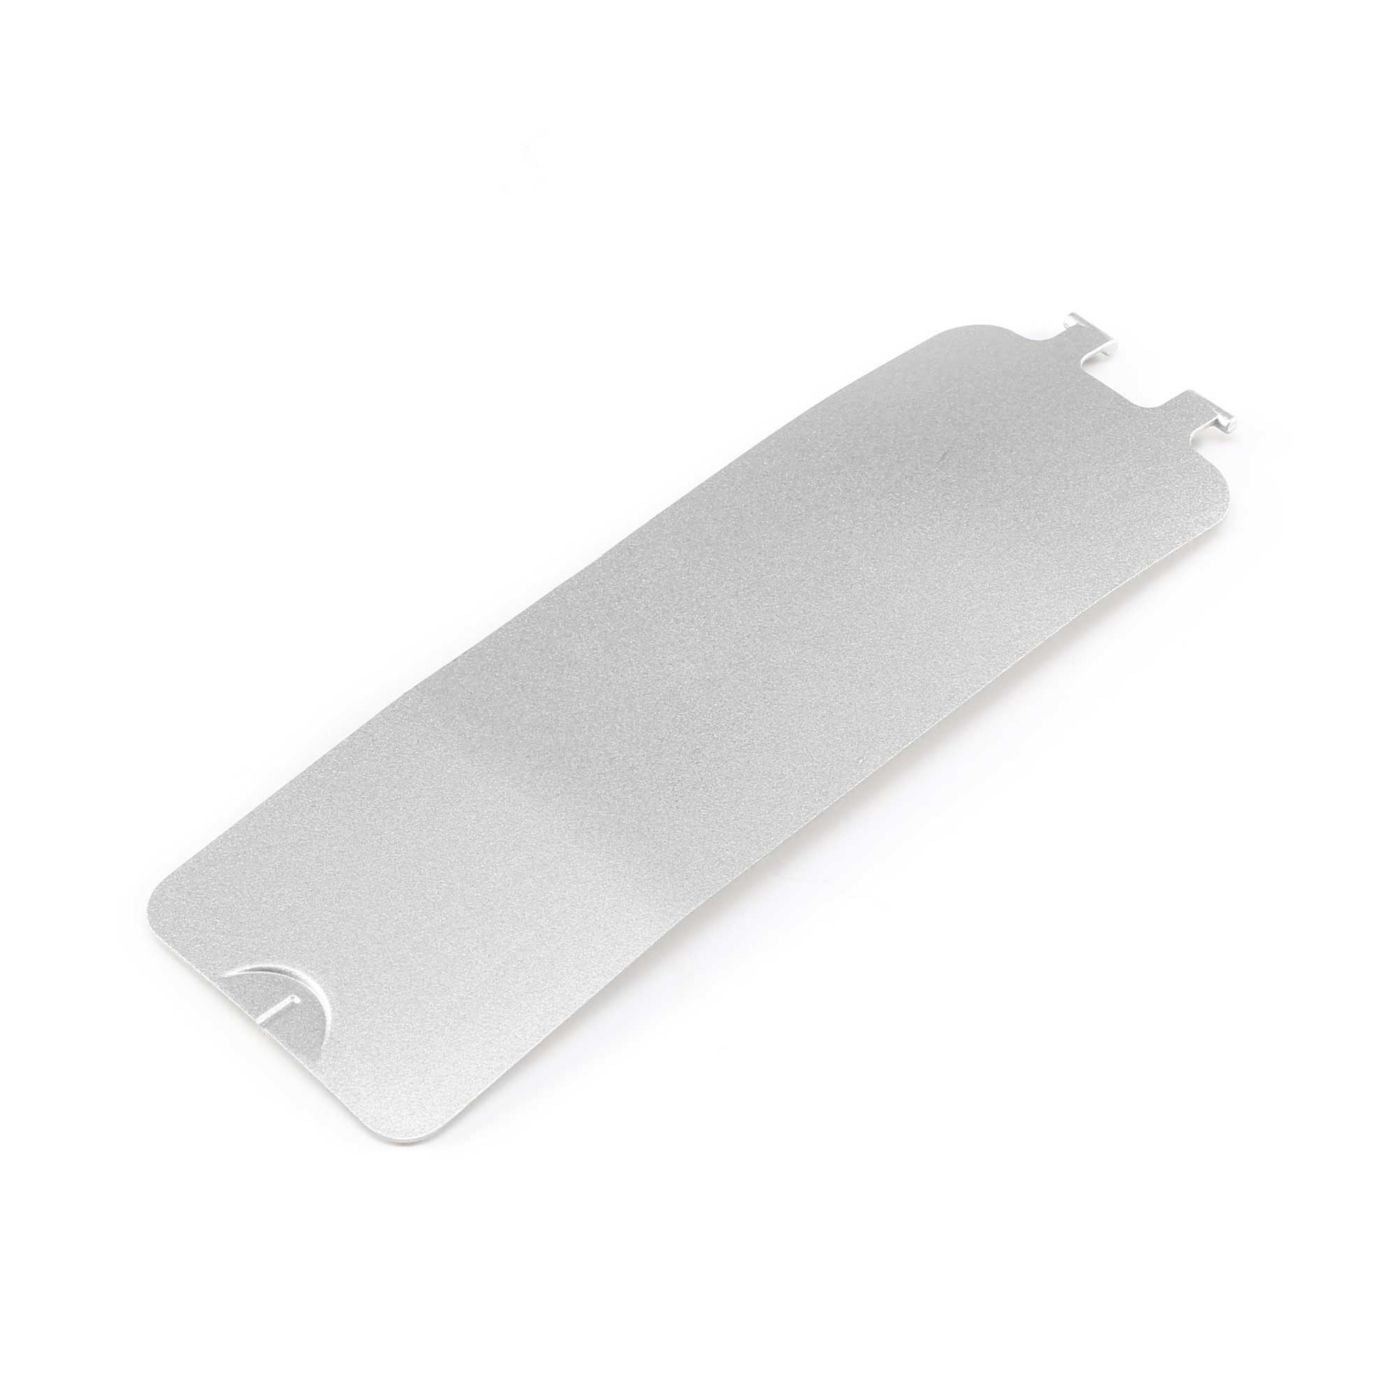 Hobbyzone Battery Hatch For Carbon Cub S+ 1.3m HBZ3228